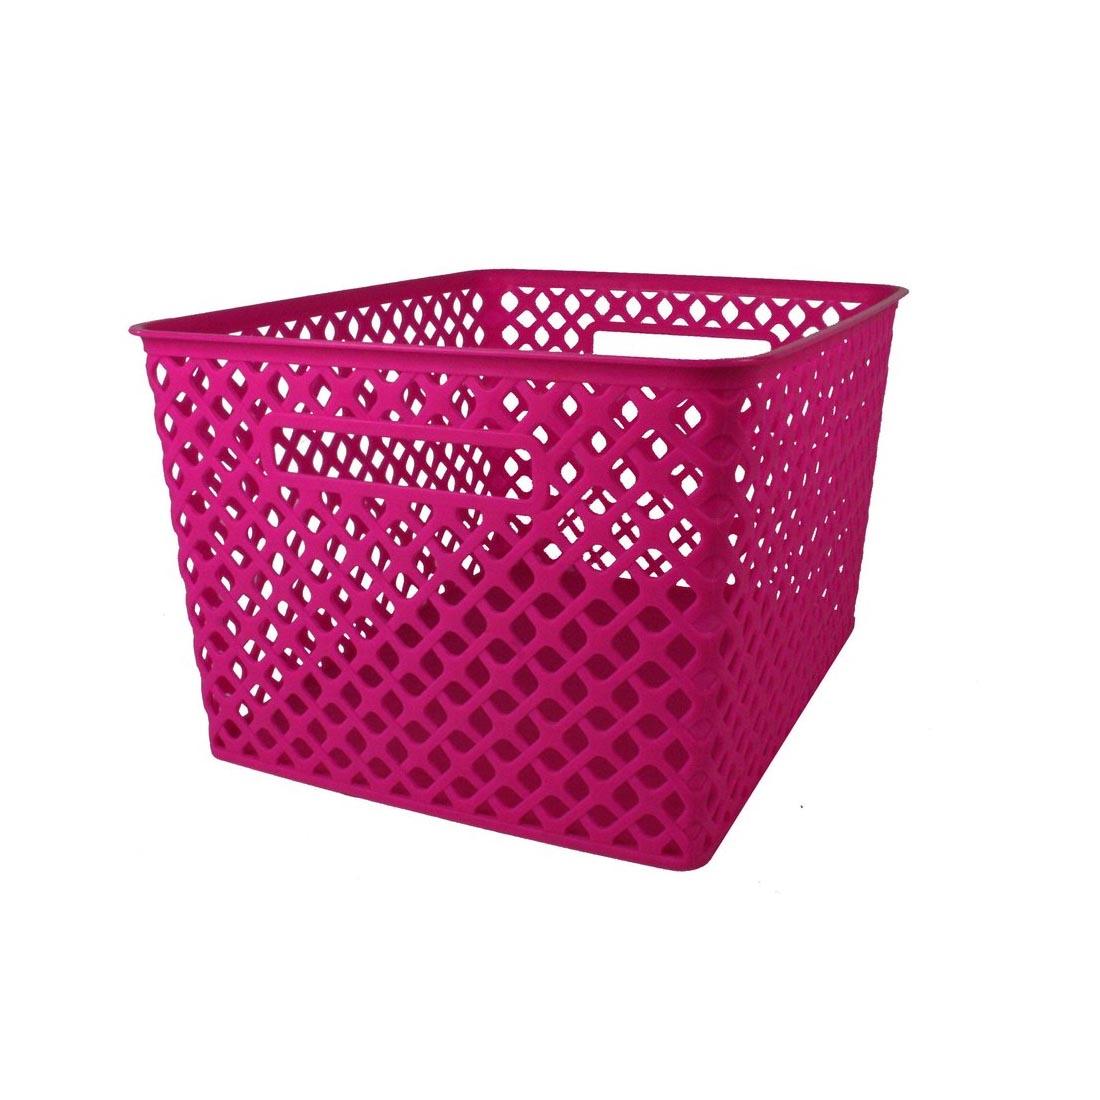 Romanoff Products Large Hot Pink Weave Storage Basket